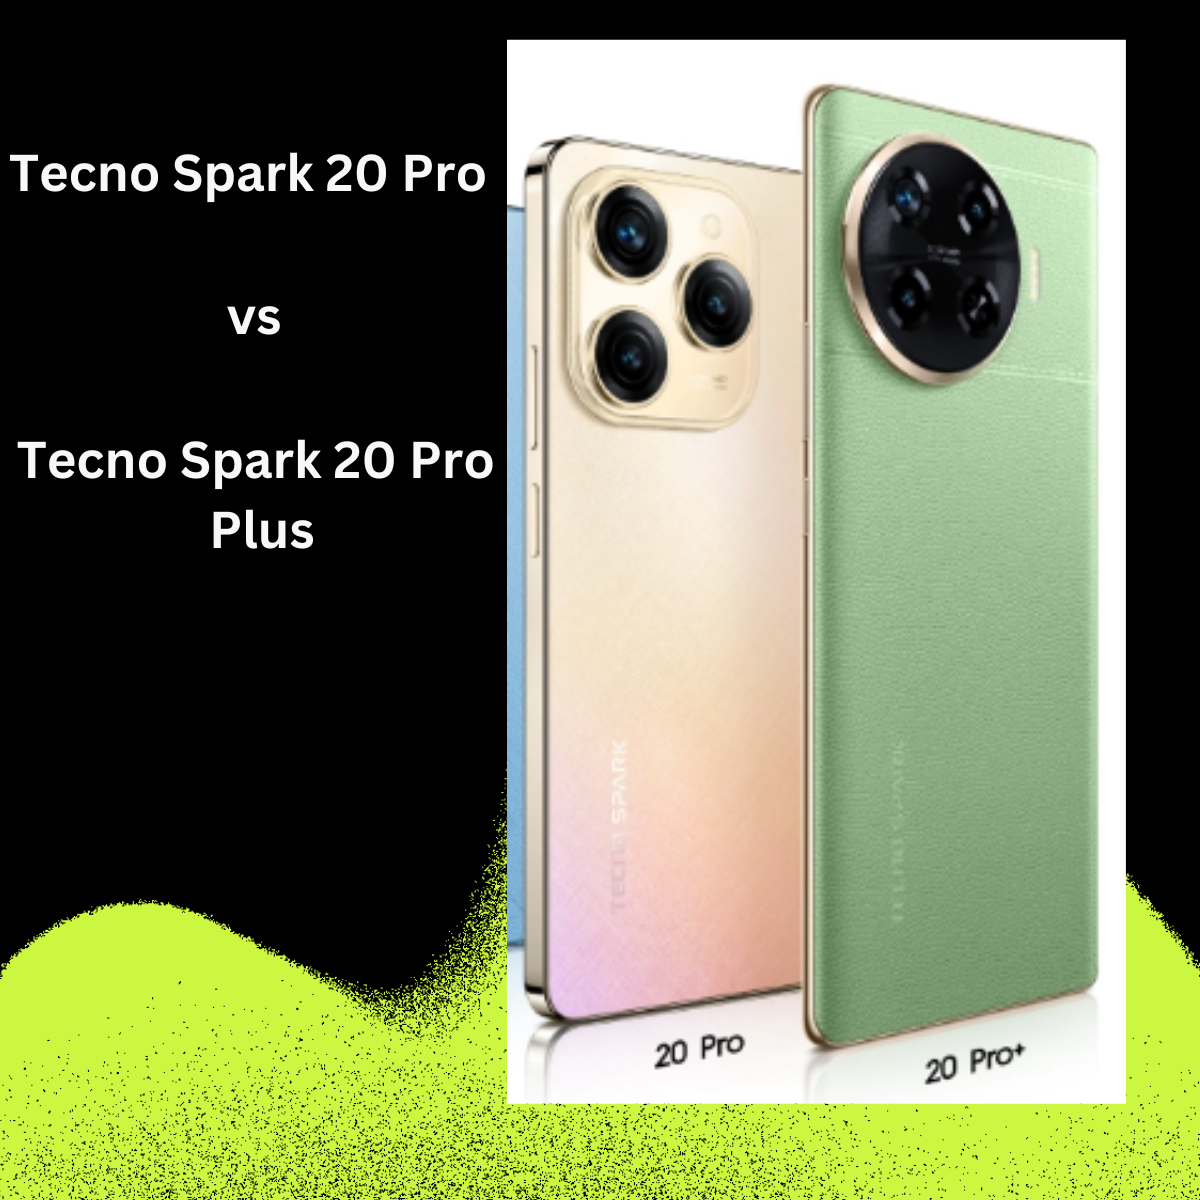 the difference between Spark 20 Pro and Spark 20 Pro +